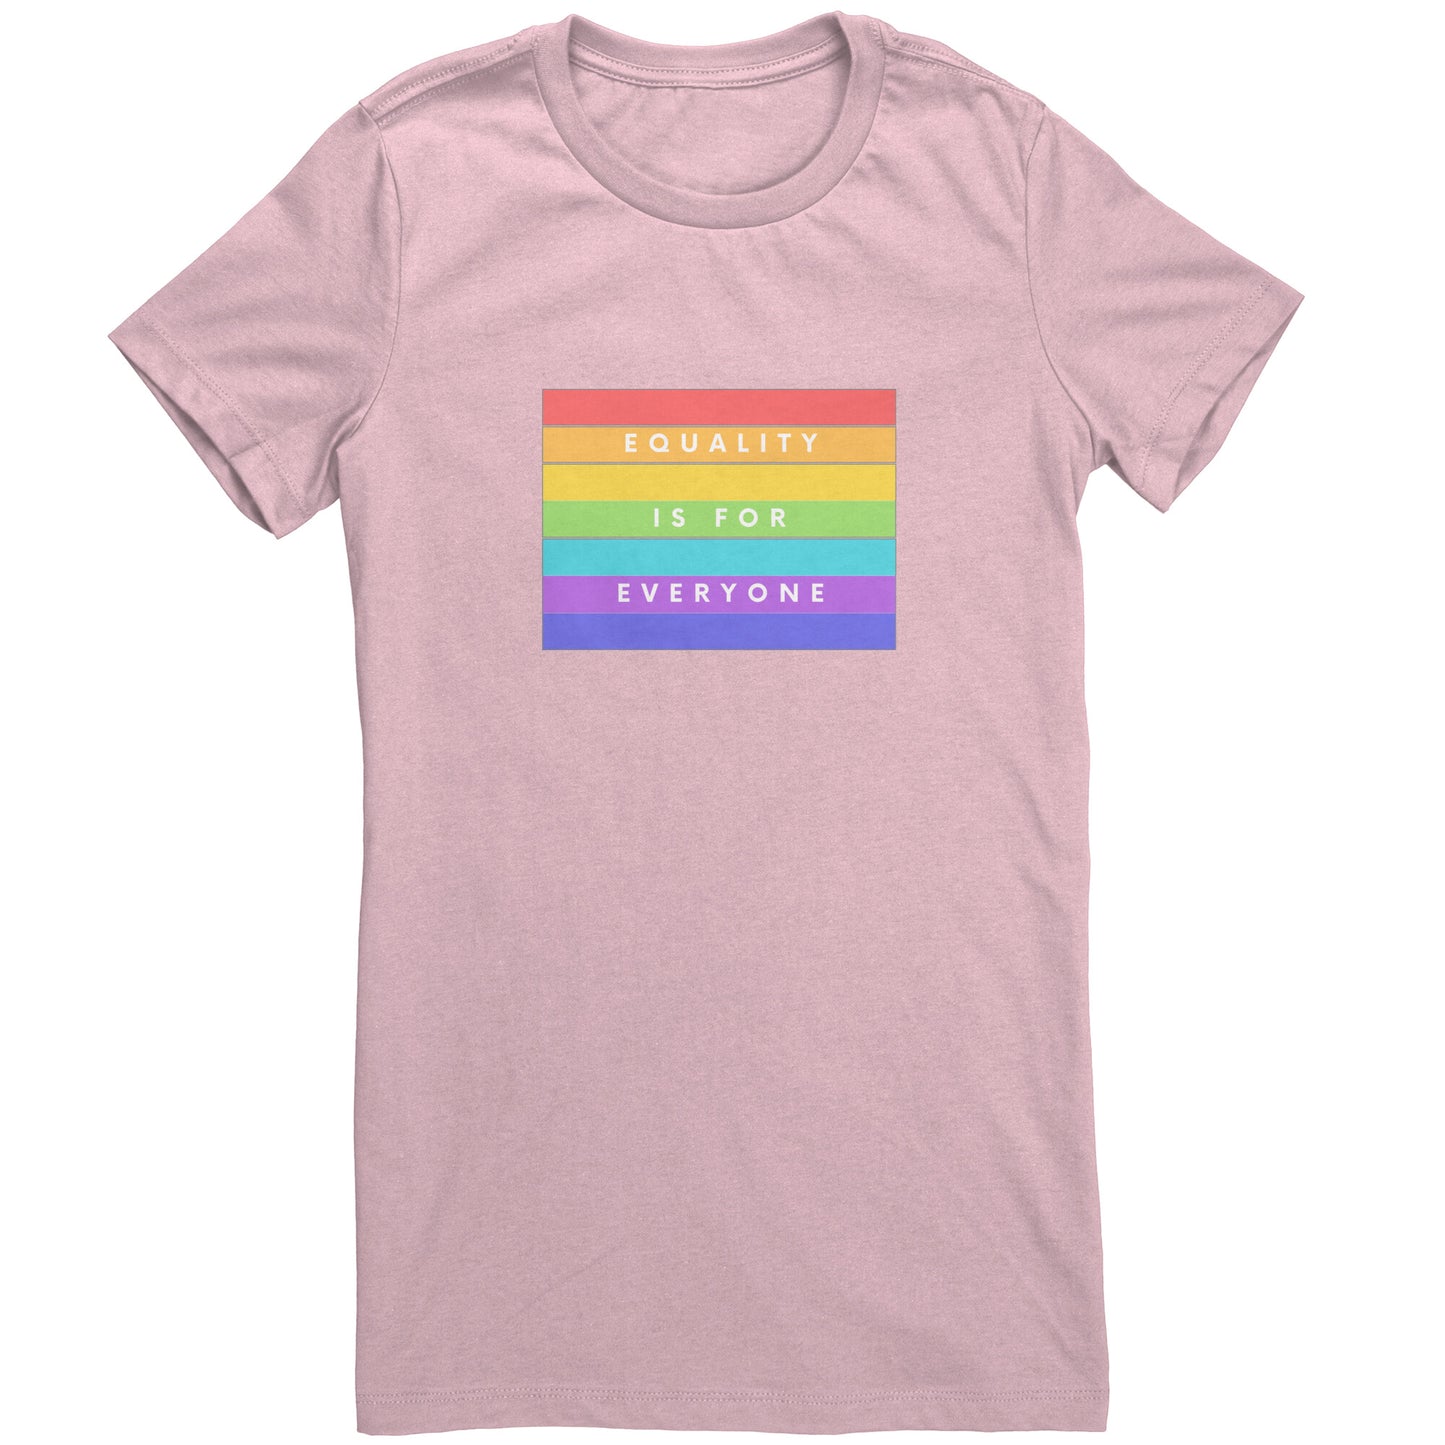 Equality for All Women's T-Shirt